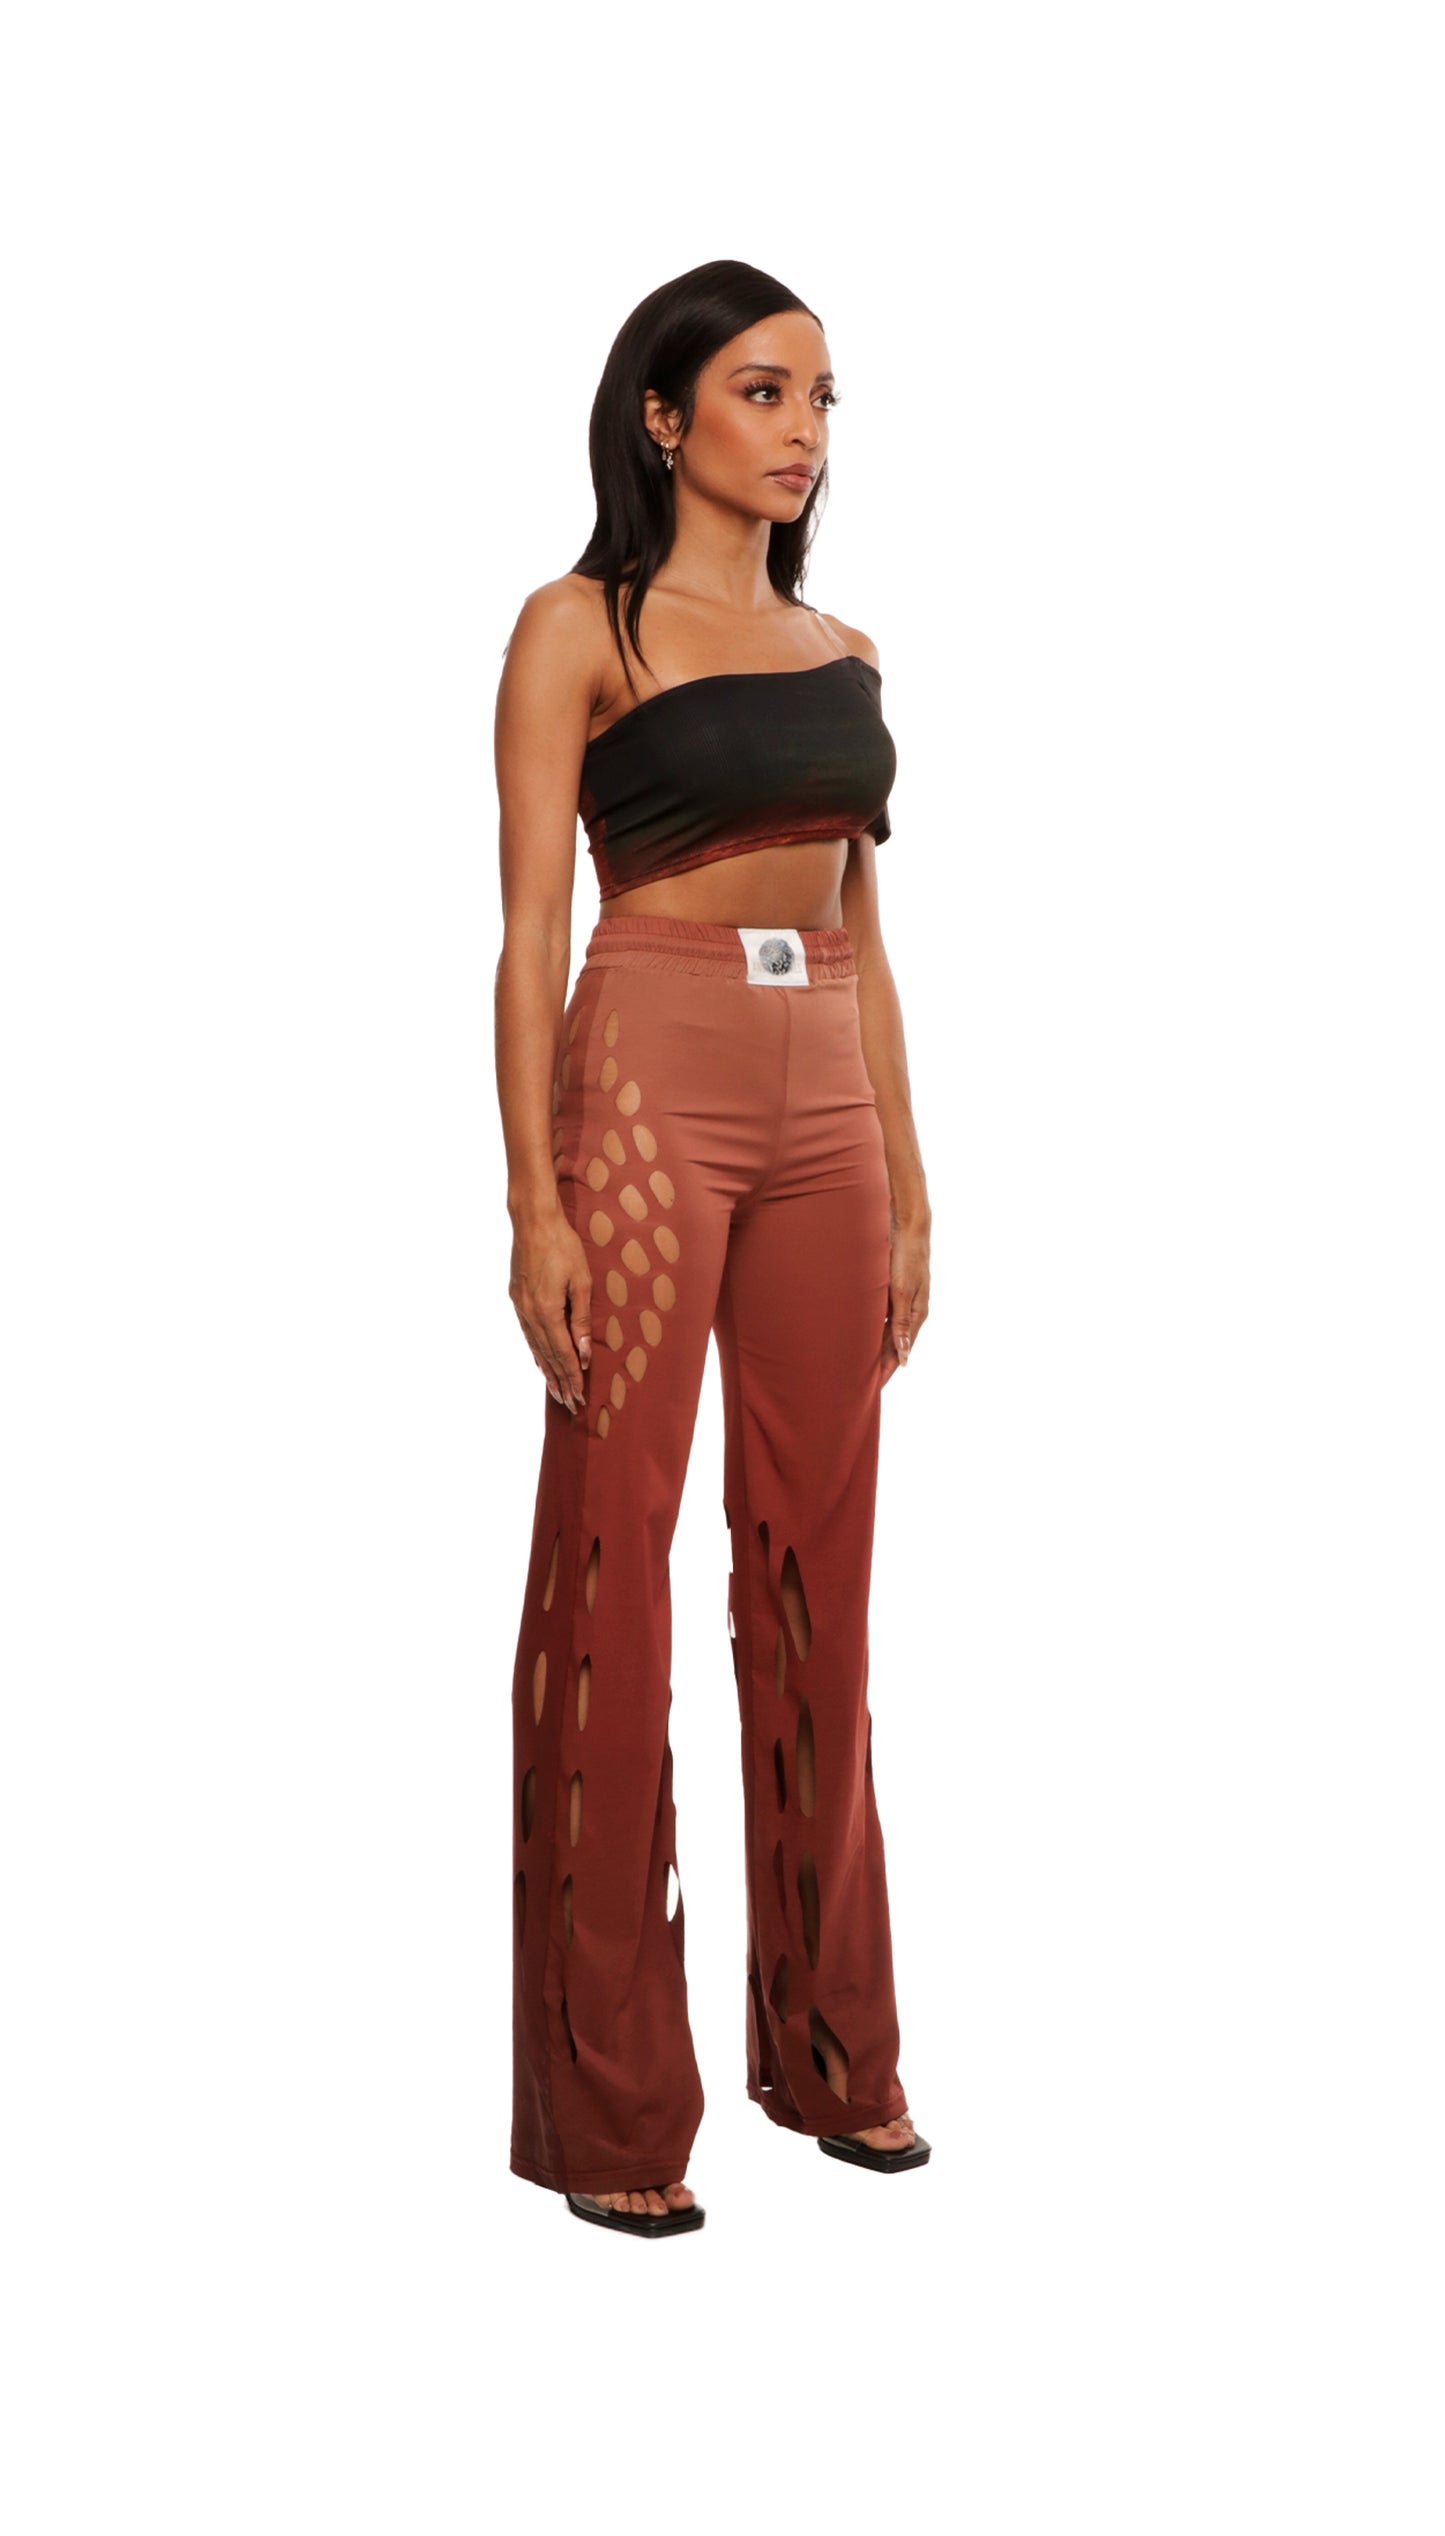 Woman who looks like Beyoncé or Aaliyah wears gradient brown toned bottoms or pants with cutout details on the sides, side view